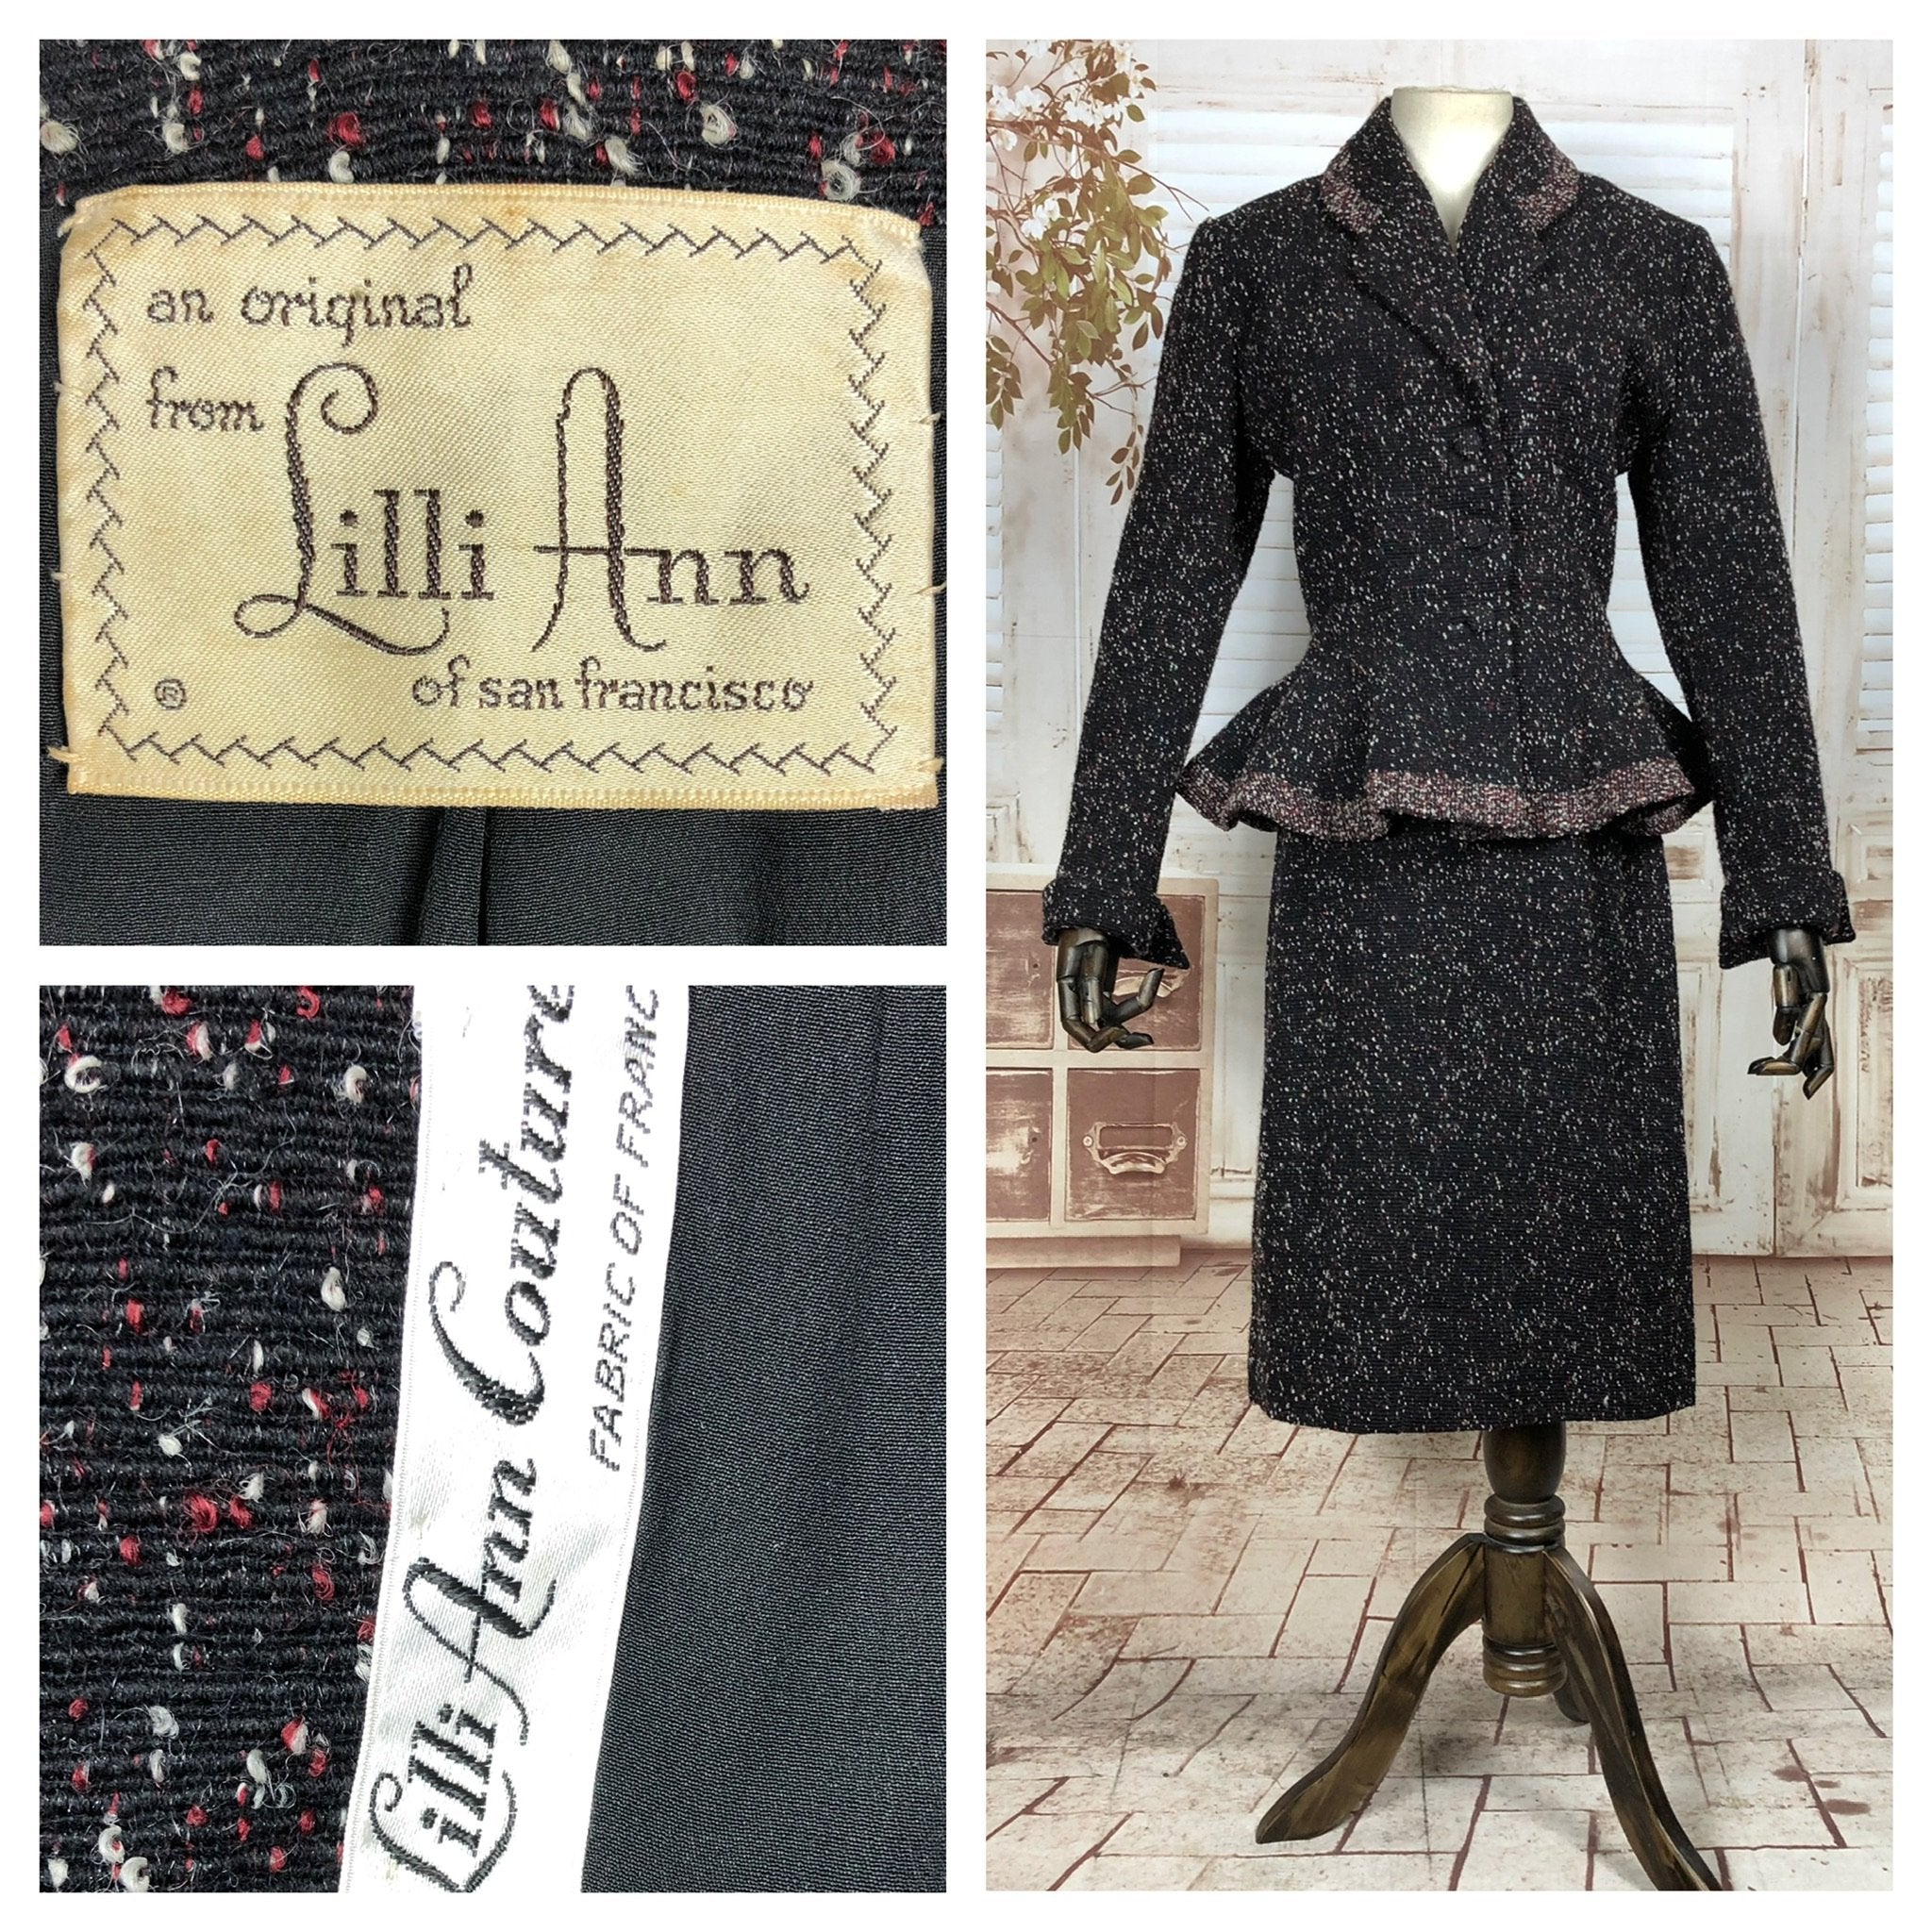 LAYAWAY PAYMENT 1 OF 2 - RESERVED ON LAYAWAY FOR LORRAINE - PLEASE DO NOT PURCHASE - Super Rare Original 1950s Lilli Ann Couture With Luxury Silk Flecked Fabric And Huge Peplum